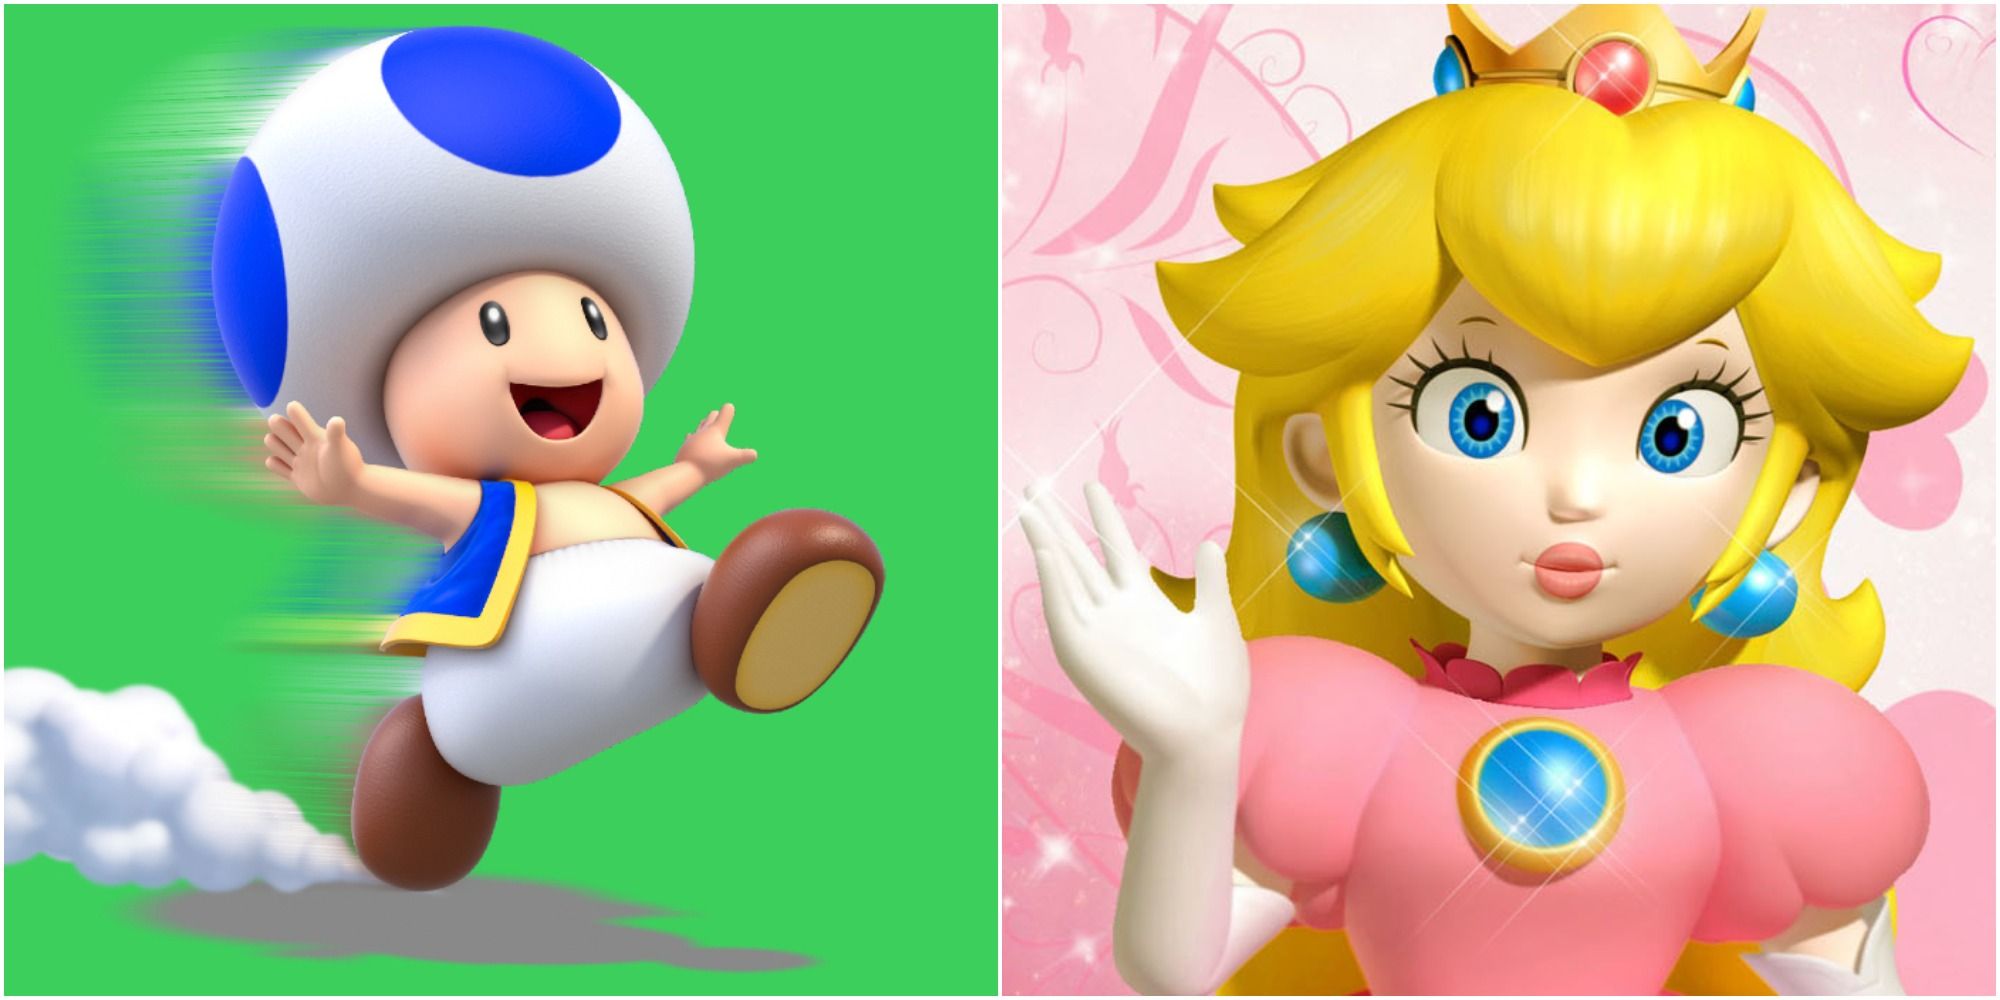 Toad and Princess Peach